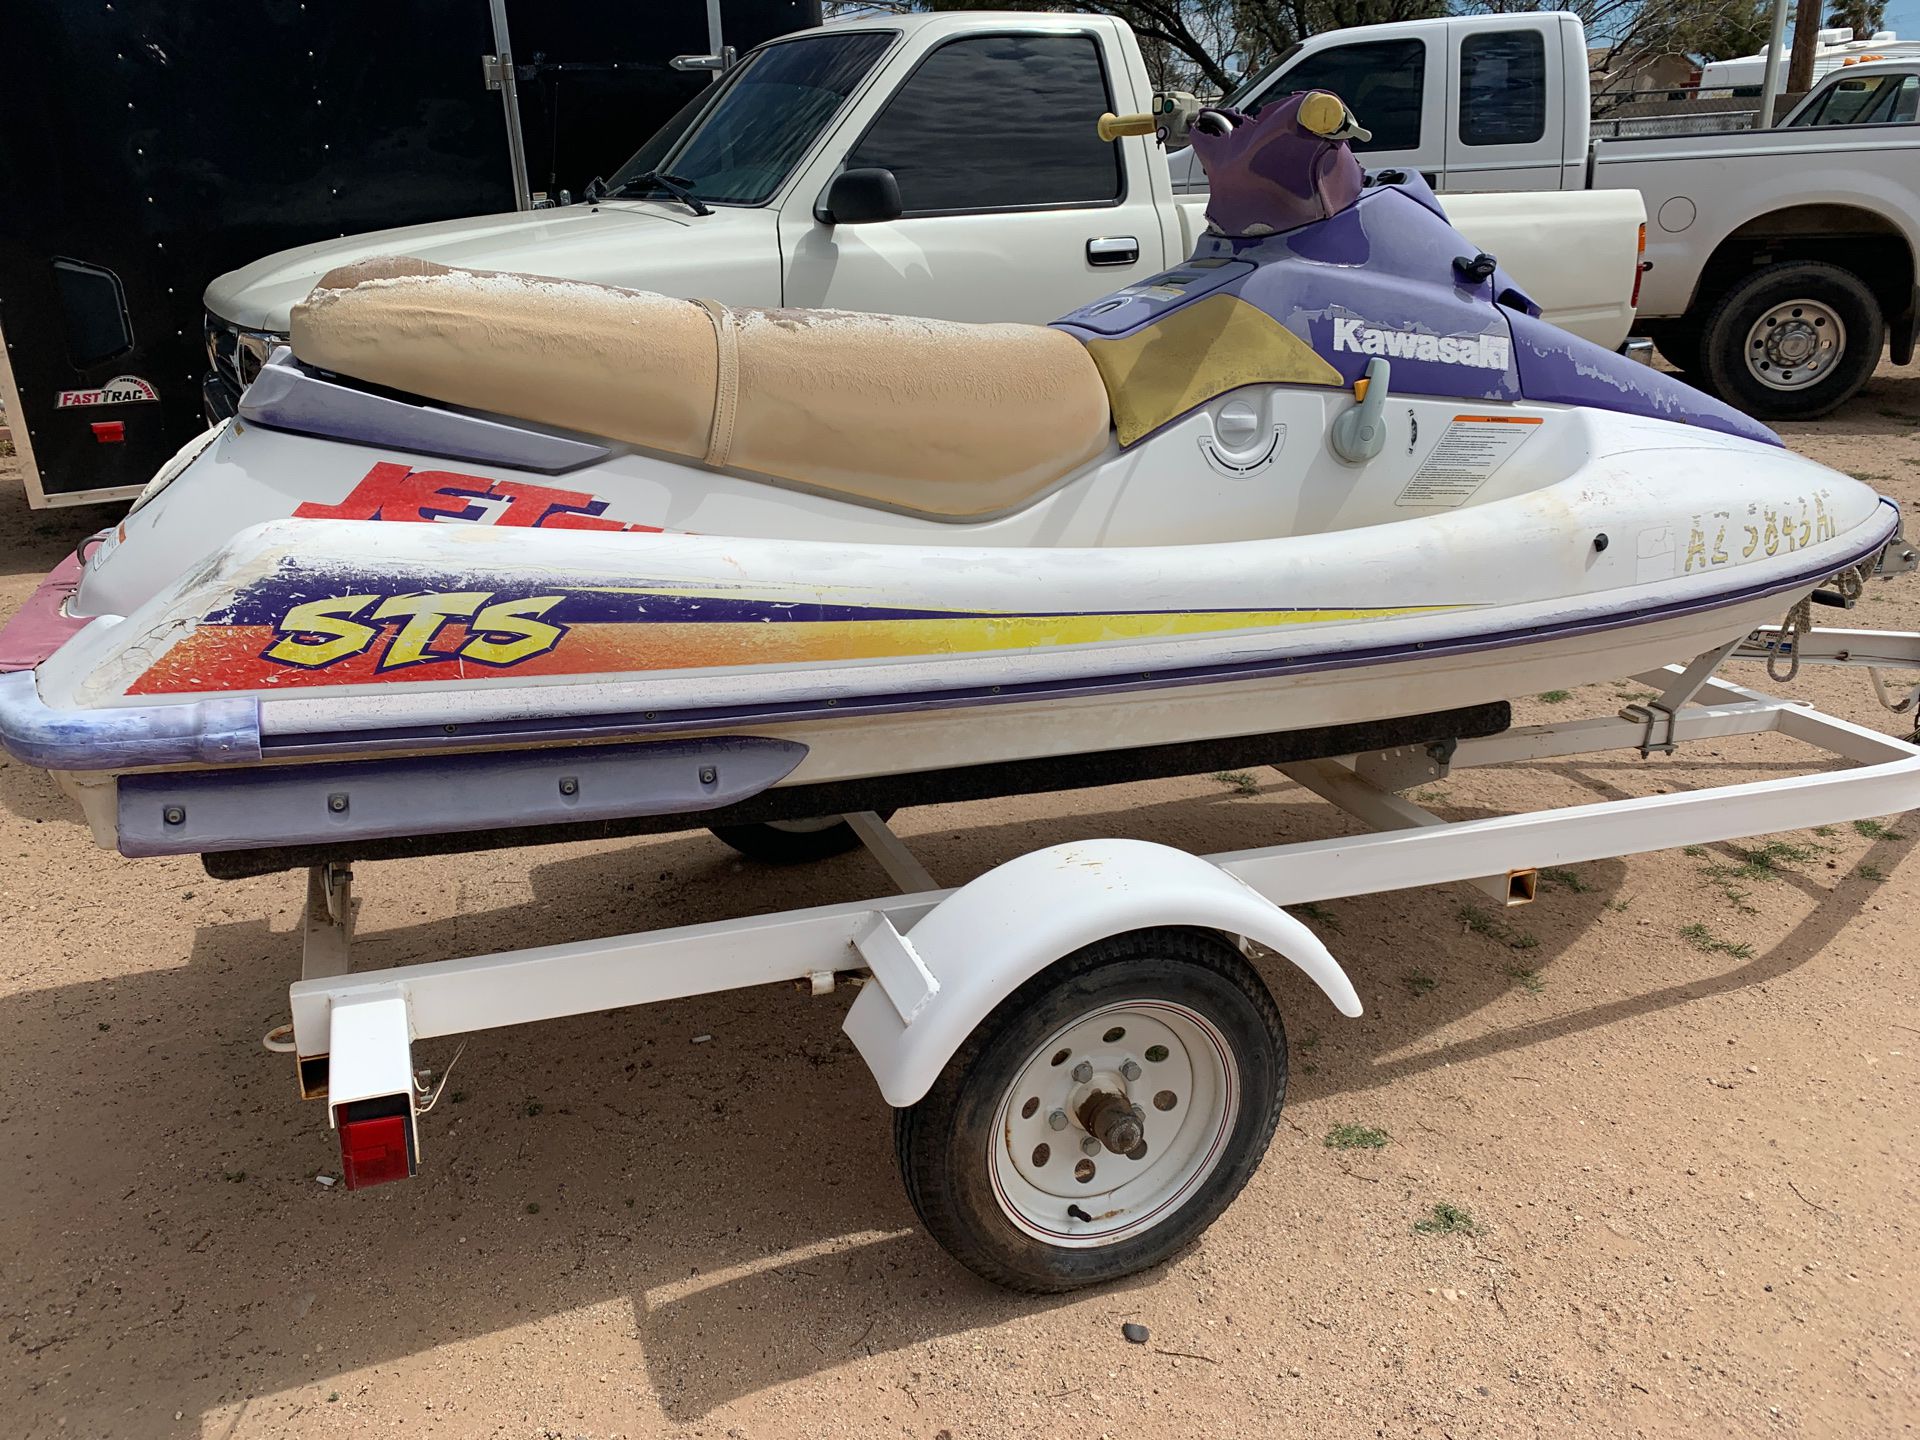 The trailer is 2000 and the jet ski is 1996 both have title the jet ski needs work is been sitting